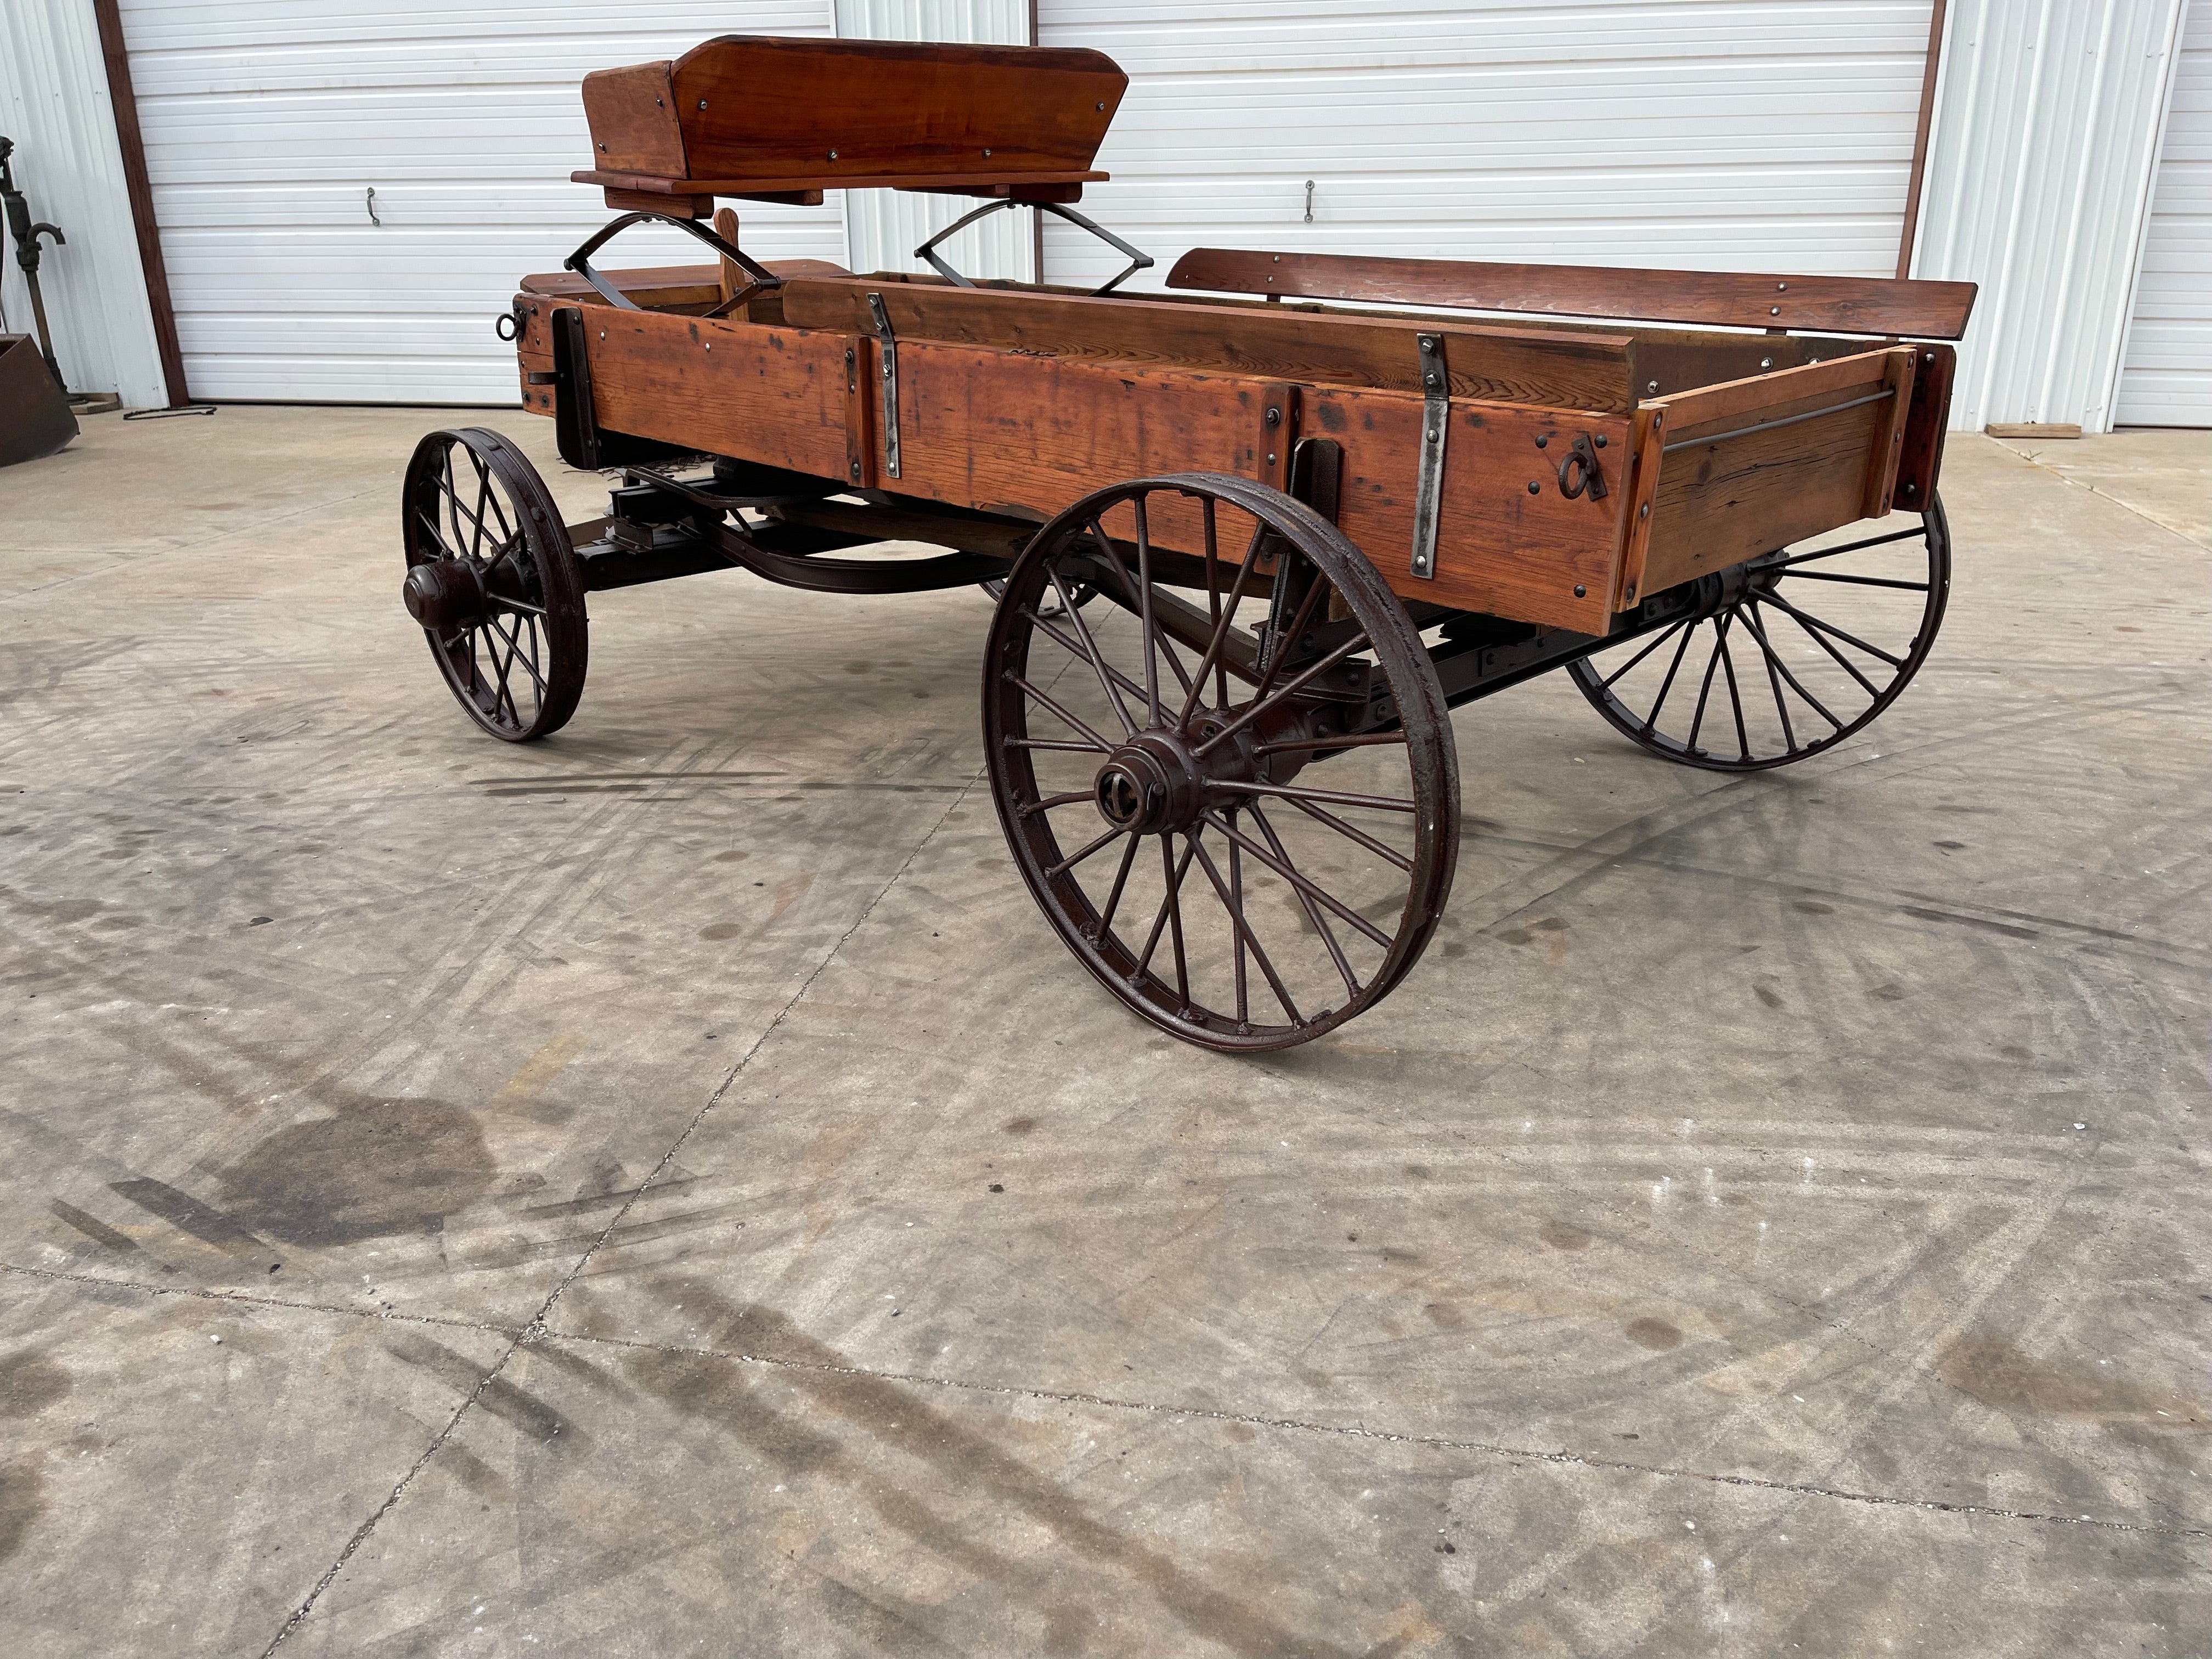 SOLD*#366 Small Harvest Display Wagon